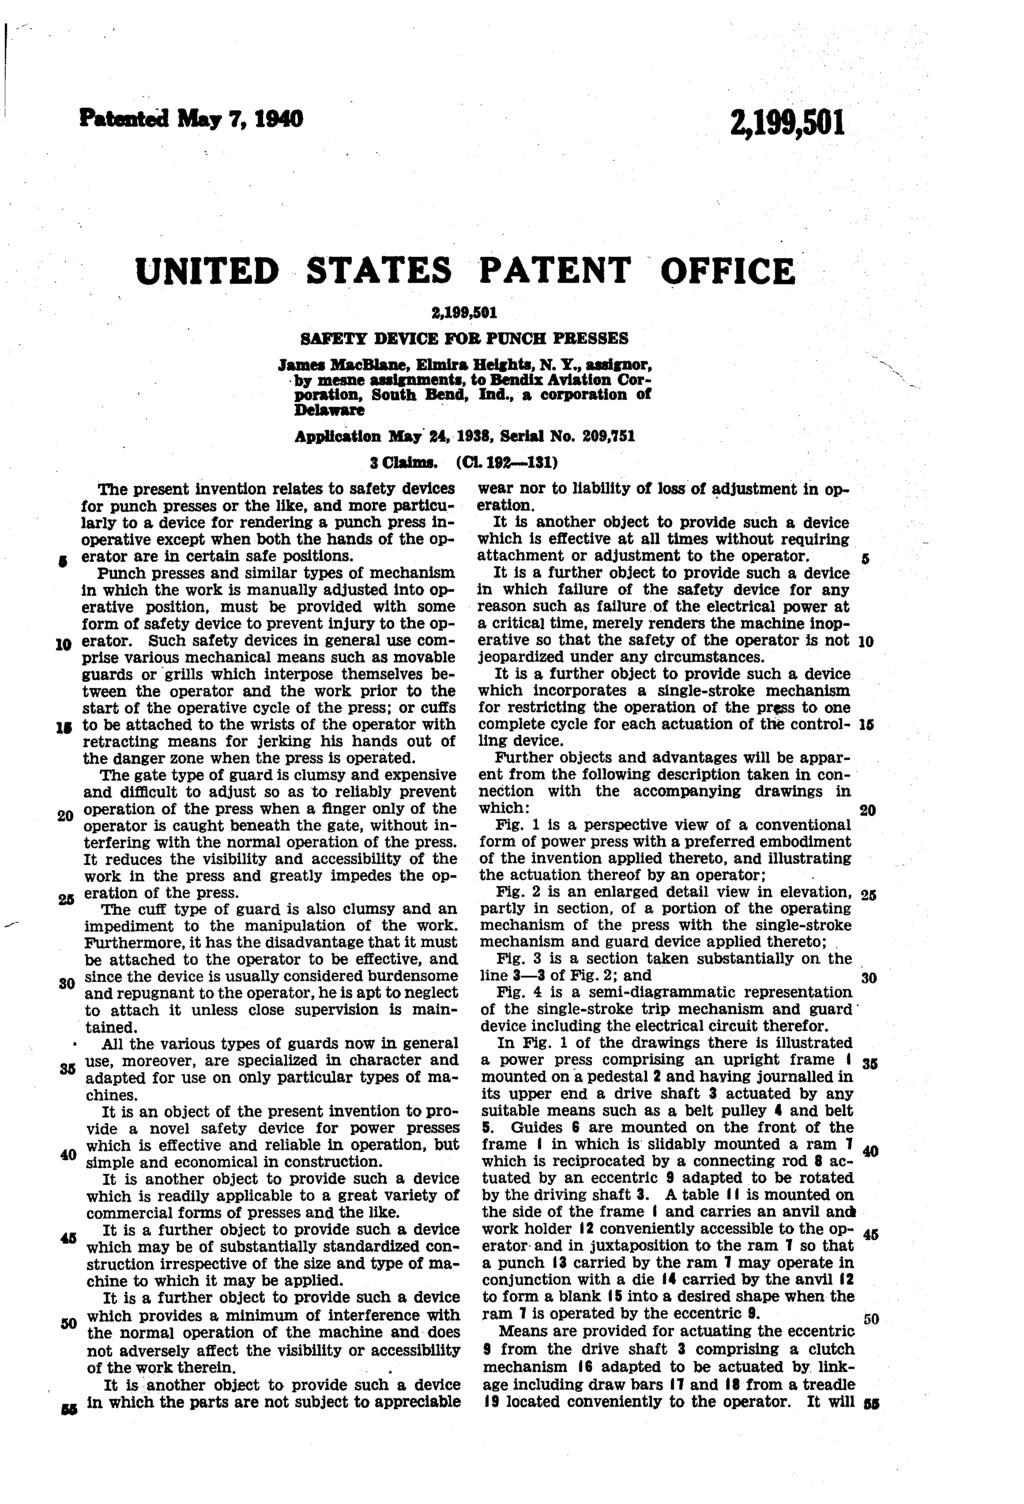 Patented May 7, 1940 A UNITED STATES PATENT FFICE SAFETY DEVICE FR PUNCE PRESSES James MacBlane, Elmira Heights, N.Y., assignor, by mesne assignments, to Bendix Aviation Cors poration, South Bend, Ind.